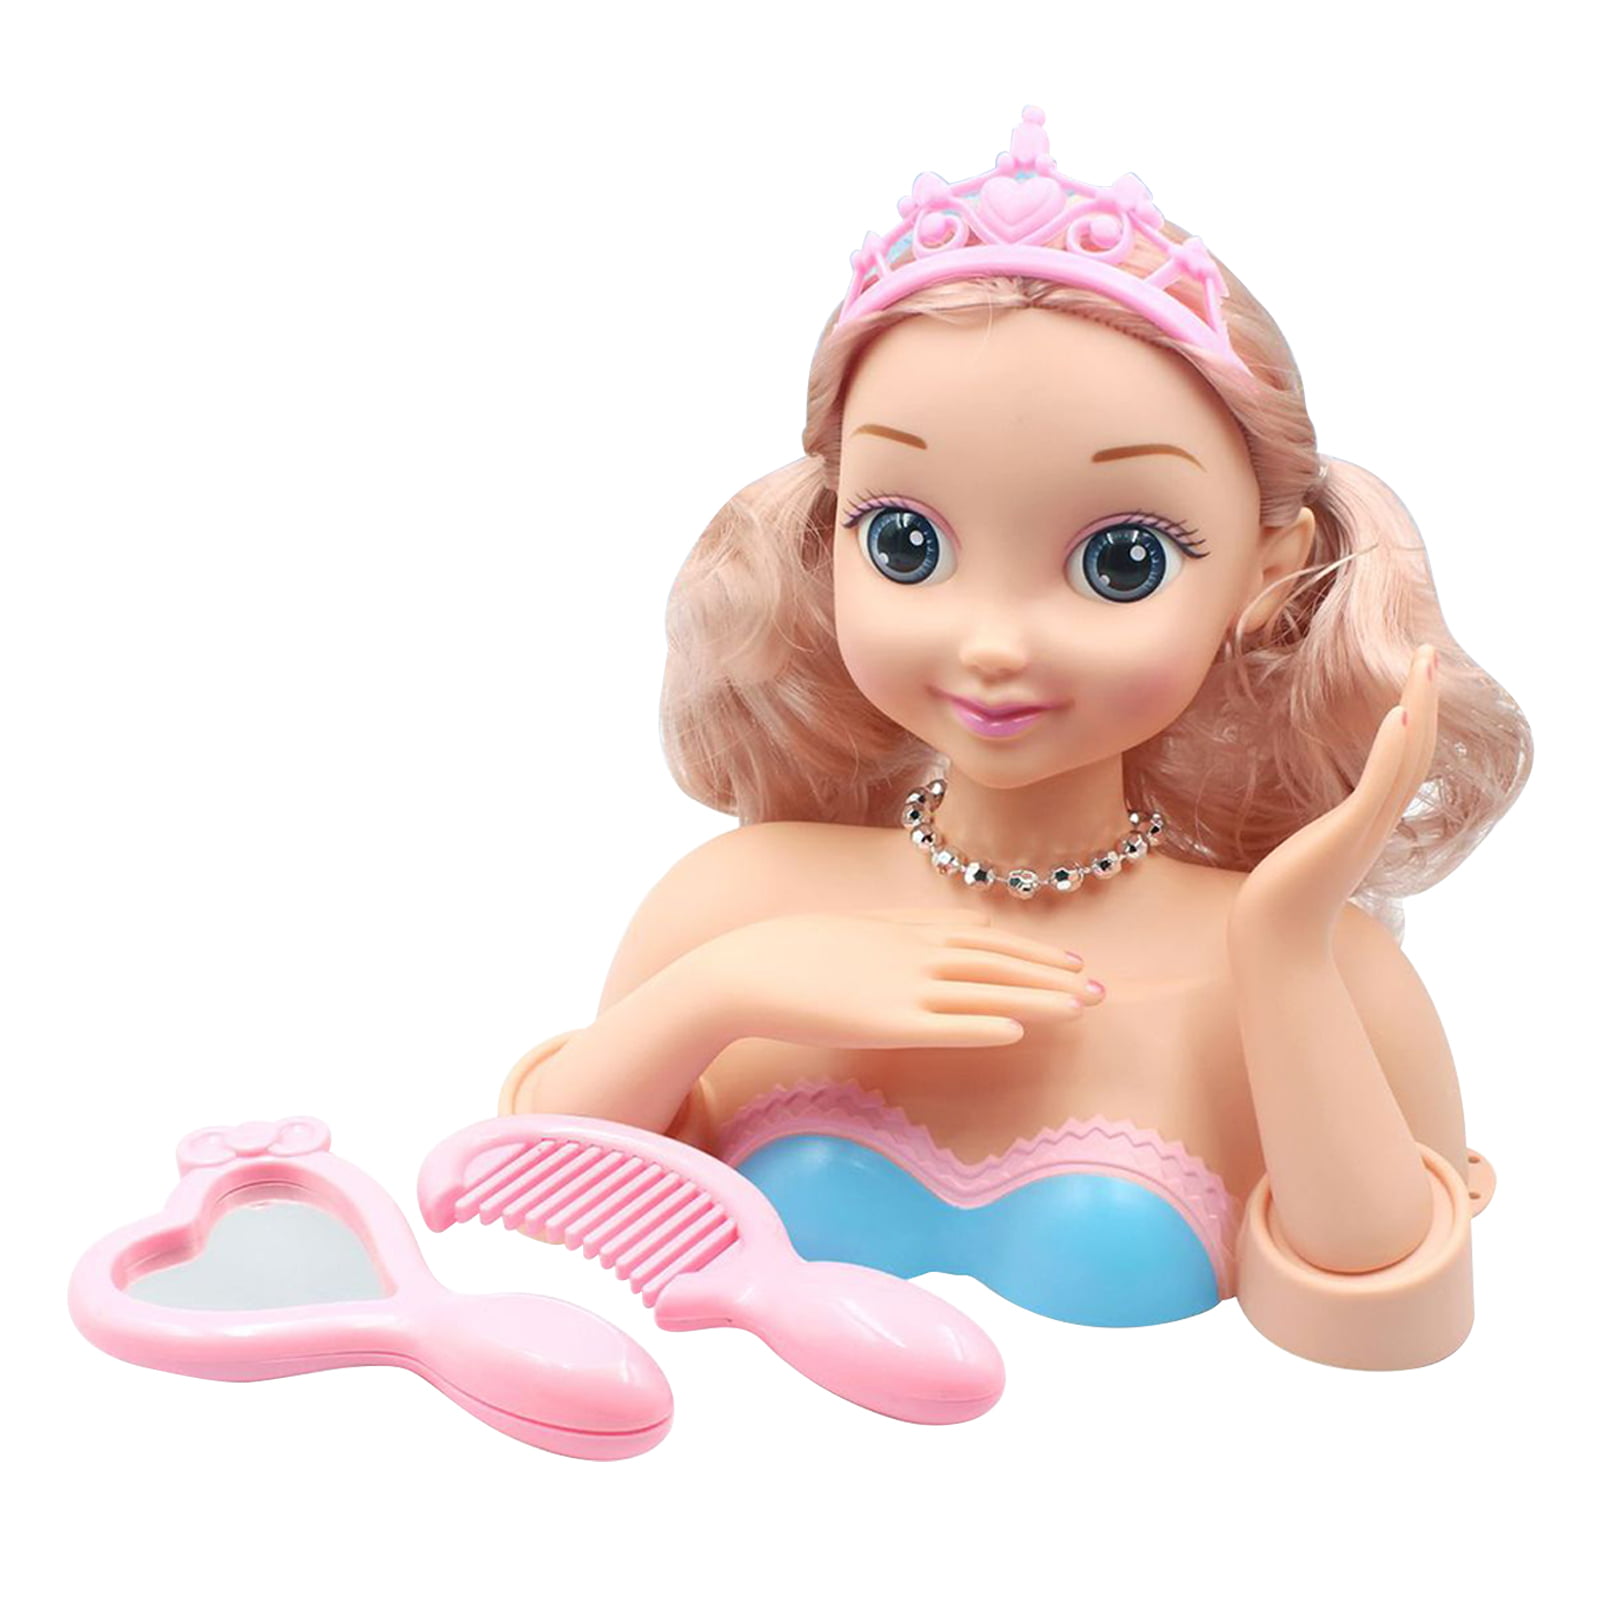 GIRLS TOY DOLL STYLING HEAD WITH ACCESSORIES COMB MIRROR MAKE UP BEAUTY VANITY 